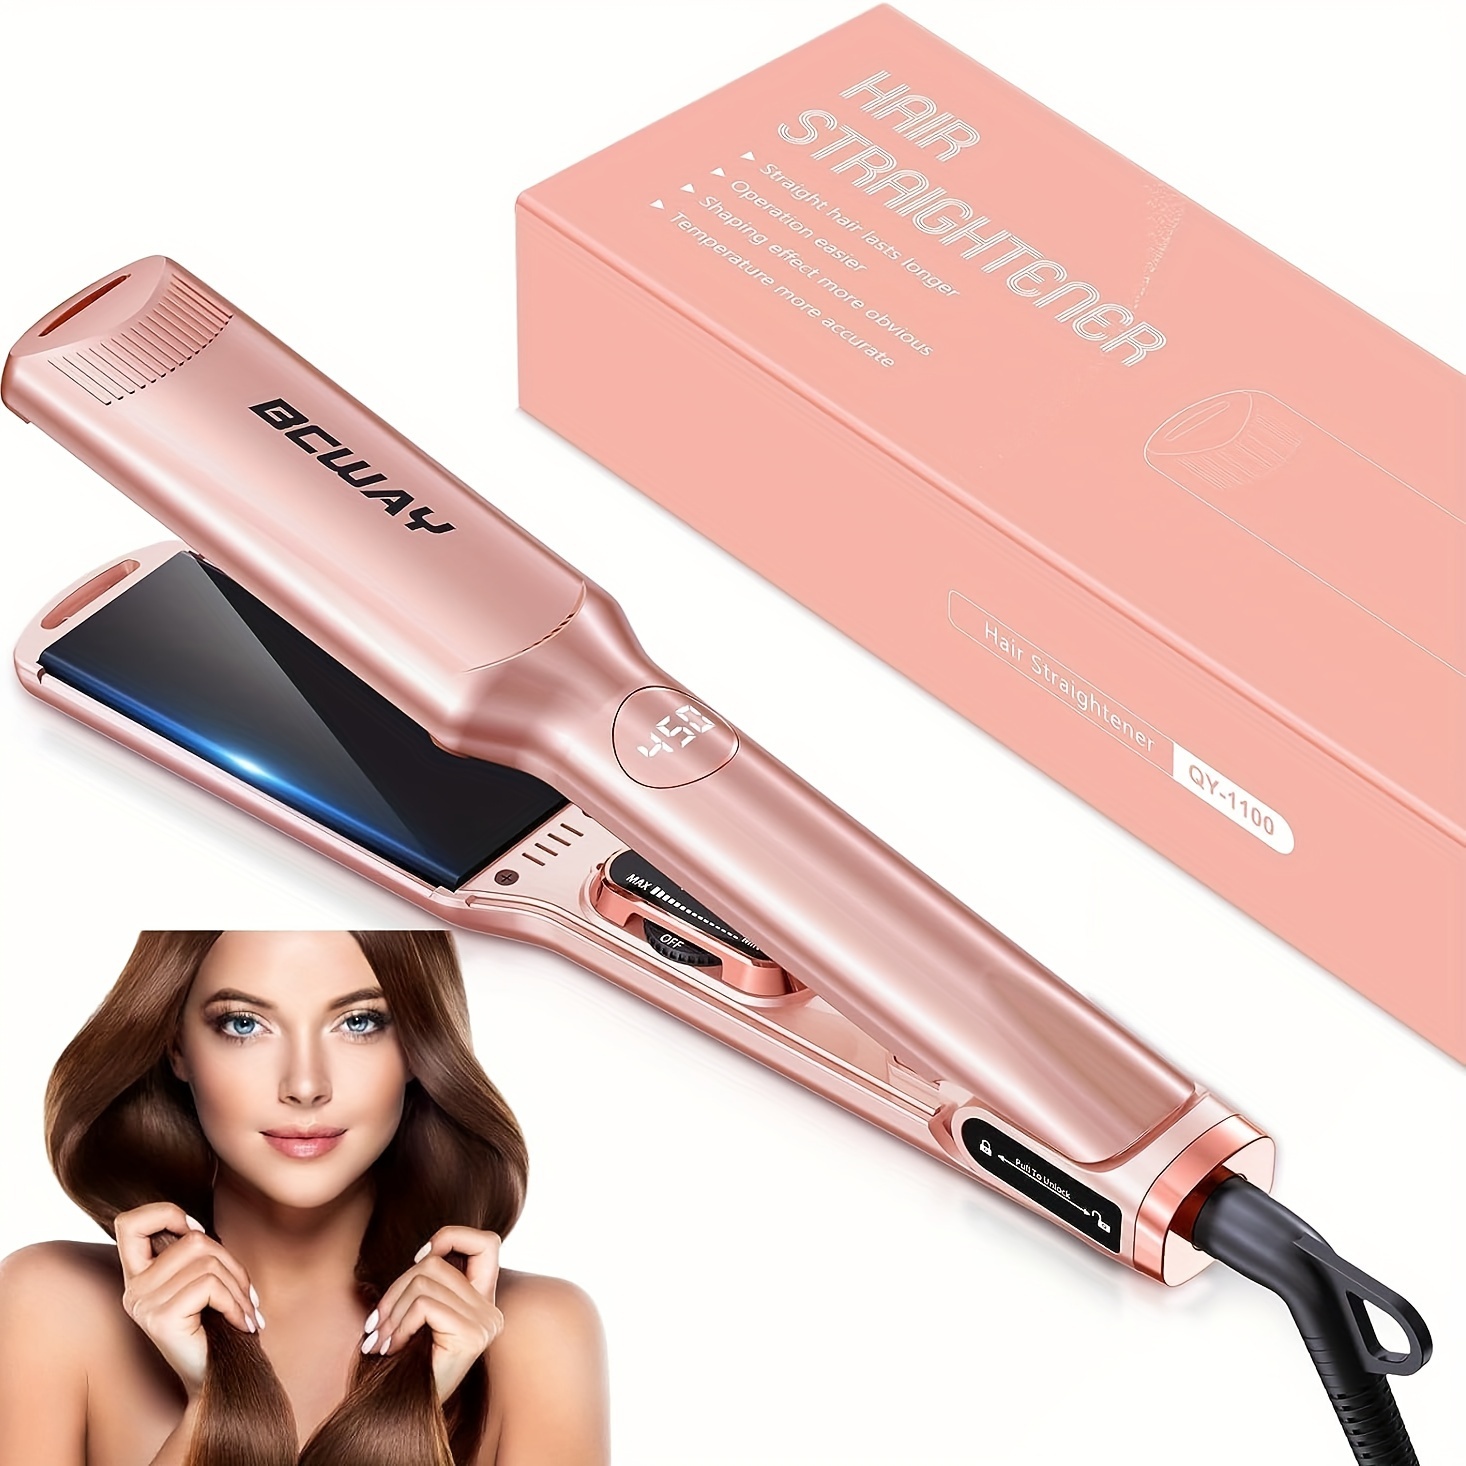 

Hair Straightener, 1.5" Wide Plate Flat Iron For Hair With Adjustable Temperature 250°f-450°f, Digital Lcd & , 3d Titanium Floating Plates 2-in-1 Hair Iron For All Hair Types